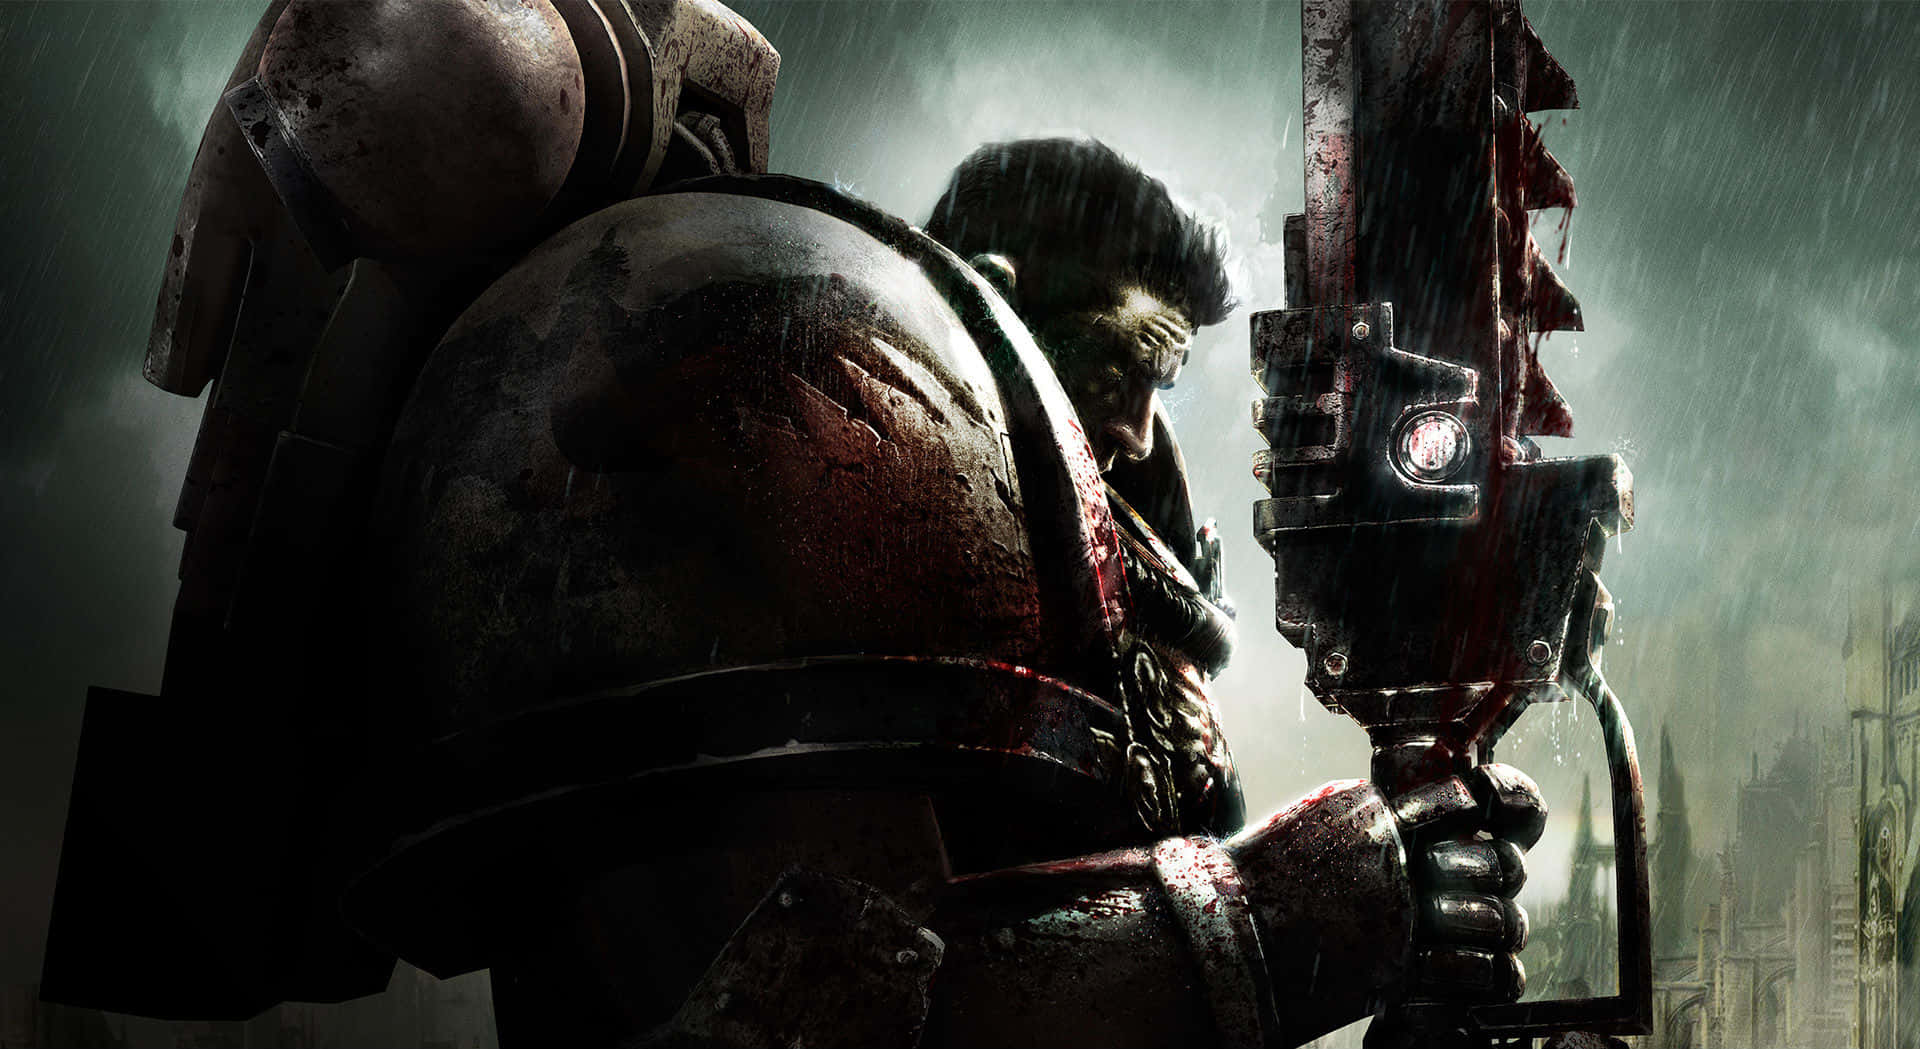 Join the Imperium of Man in Warhammer 40k Wallpaper